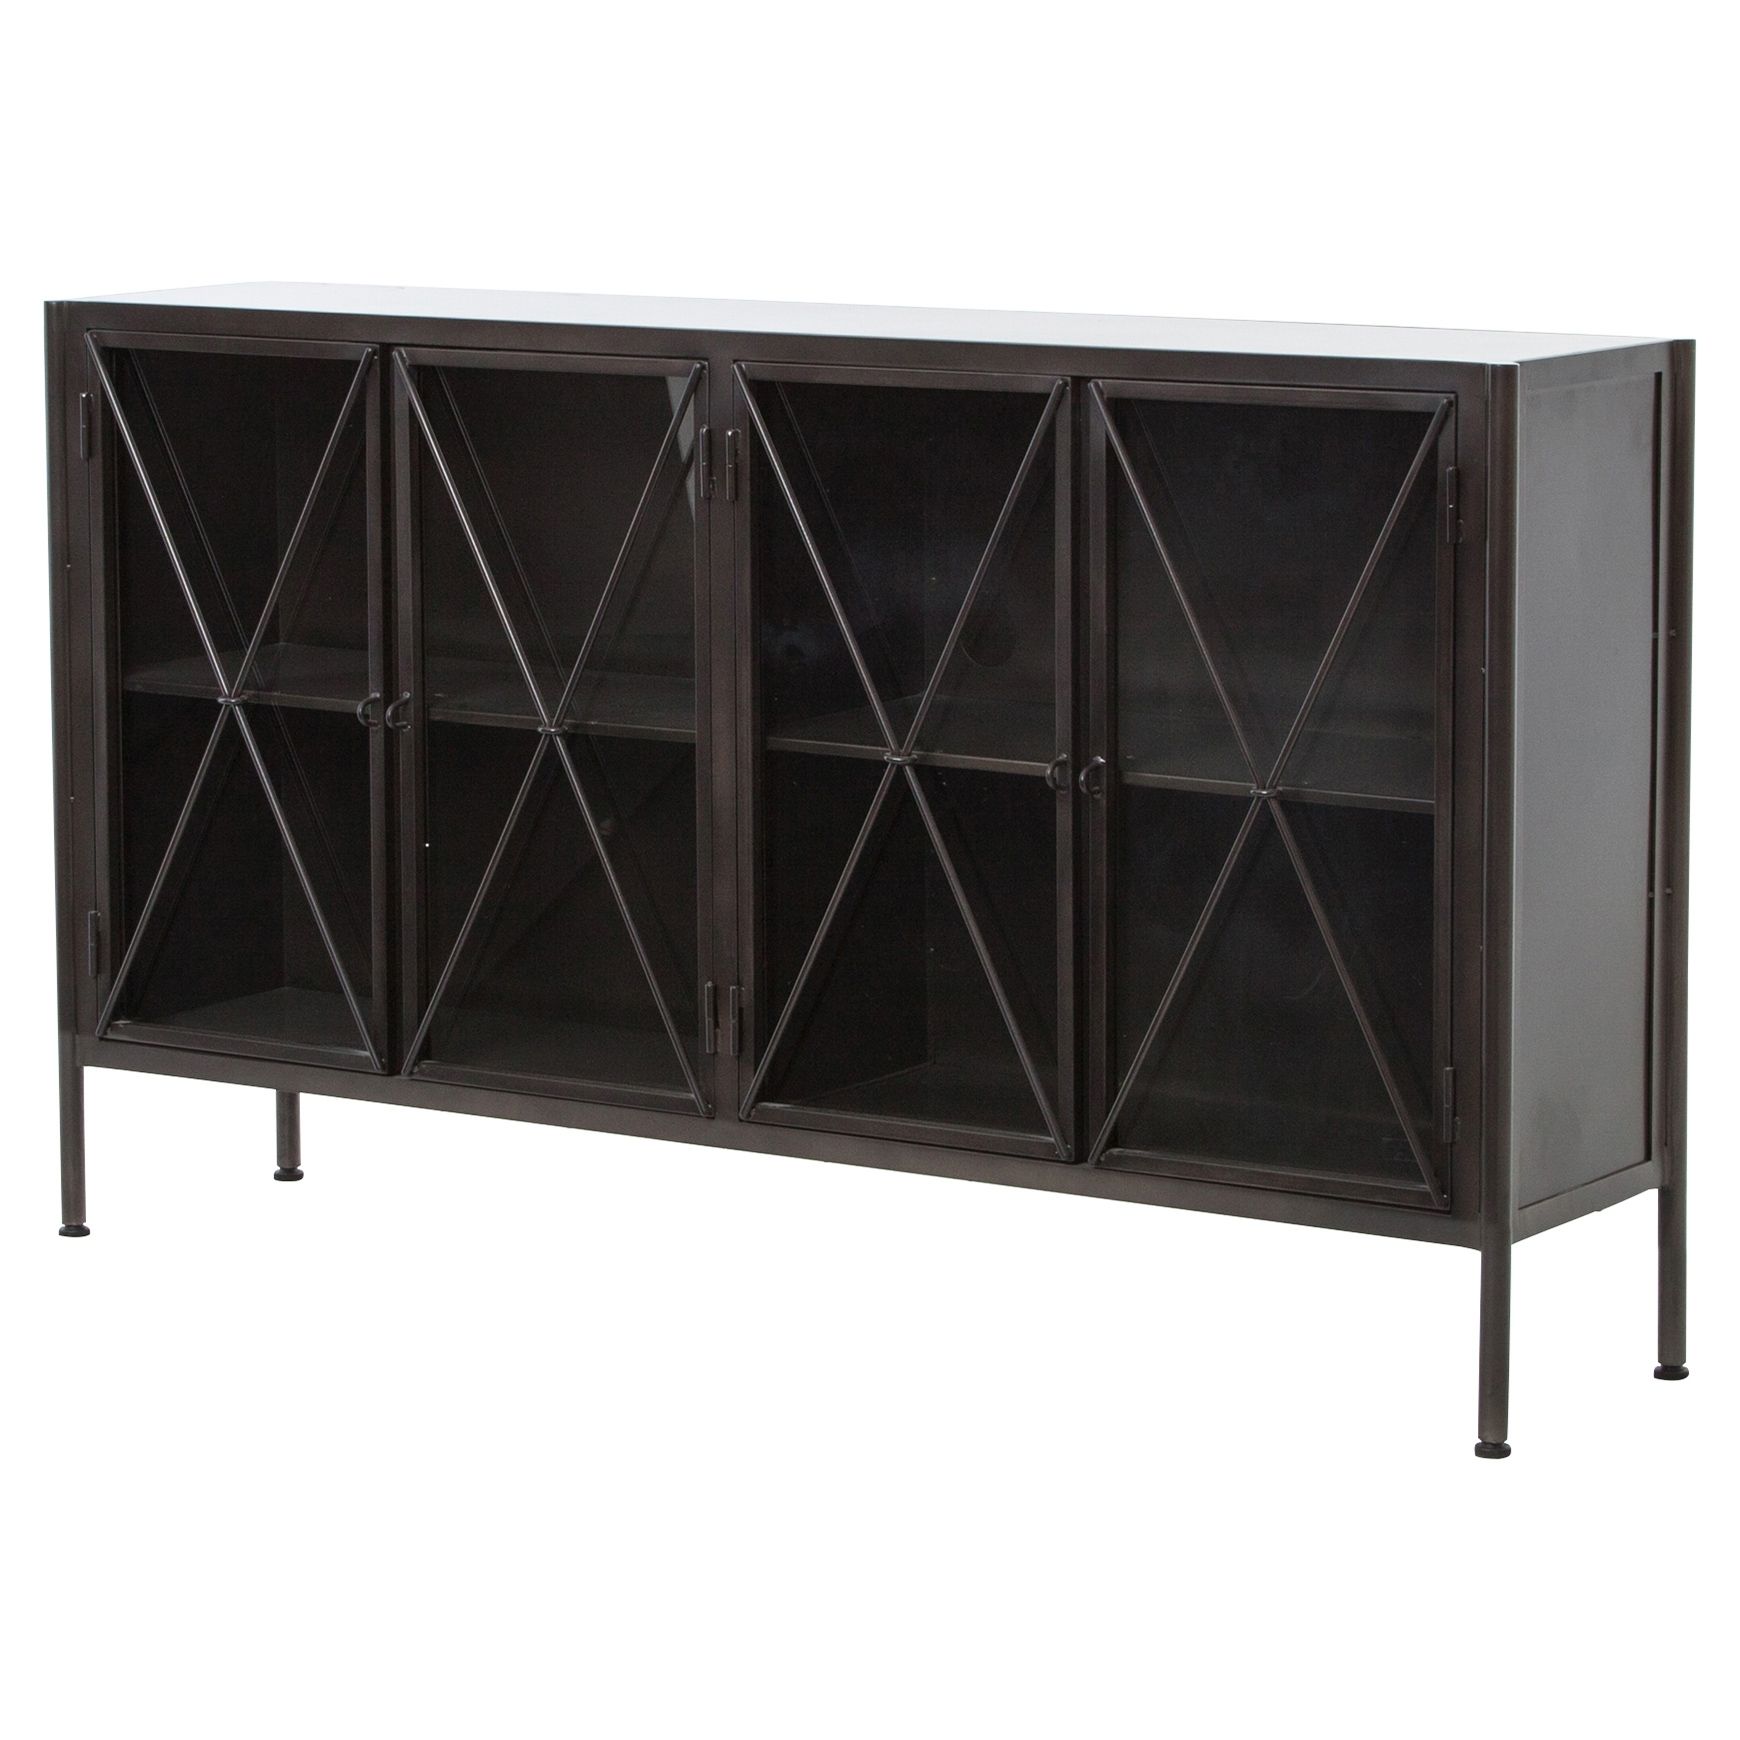 Buffets & Sideboards | Kathy Kuo Home Pertaining To Current Iron Sideboards (View 4 of 20)